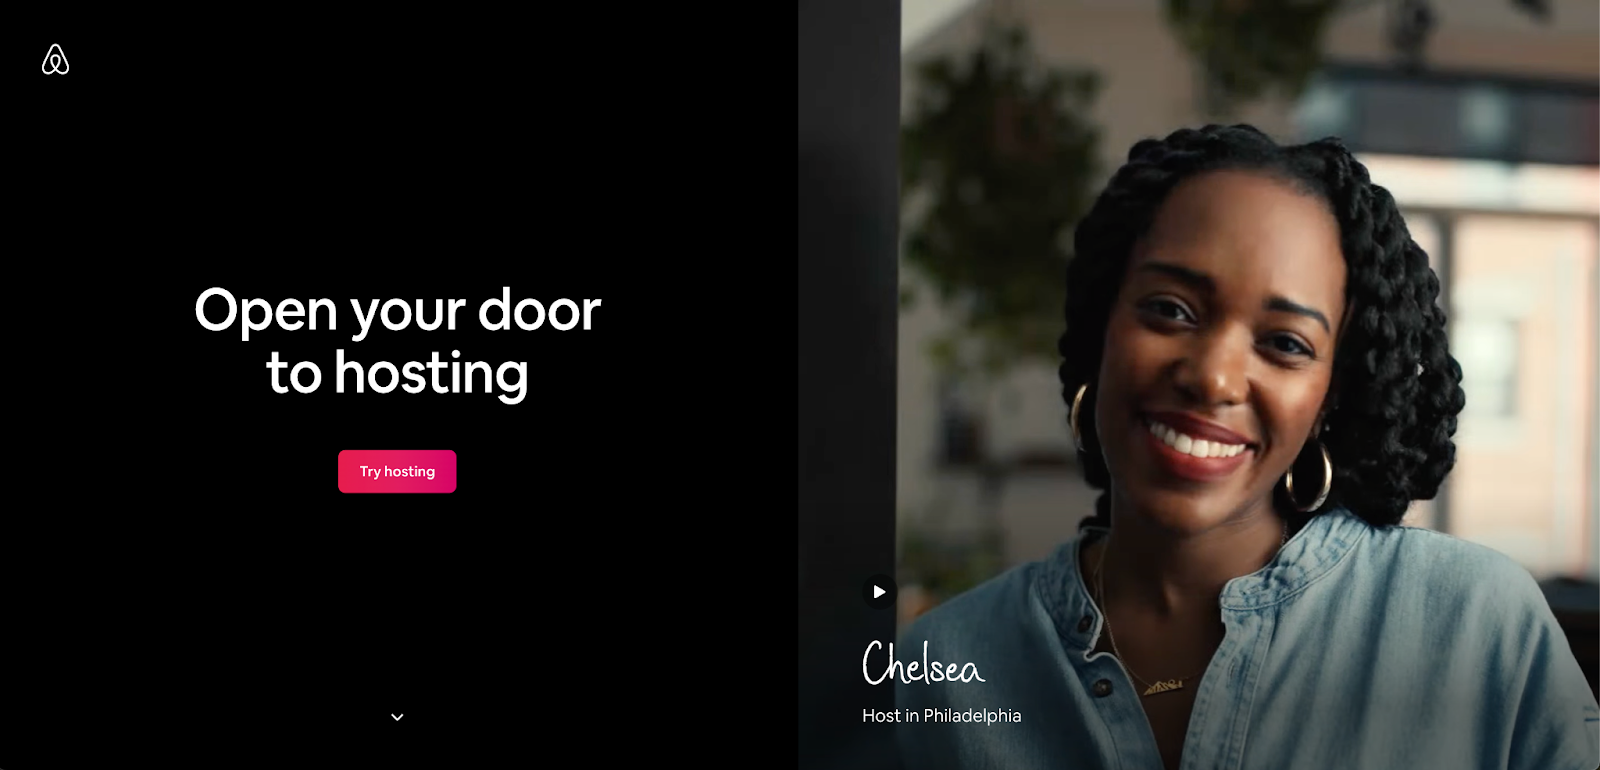 A black background with a white heading in the middle "Open your door to hosting". Underneath a pink CTA button that says "Try hosting".